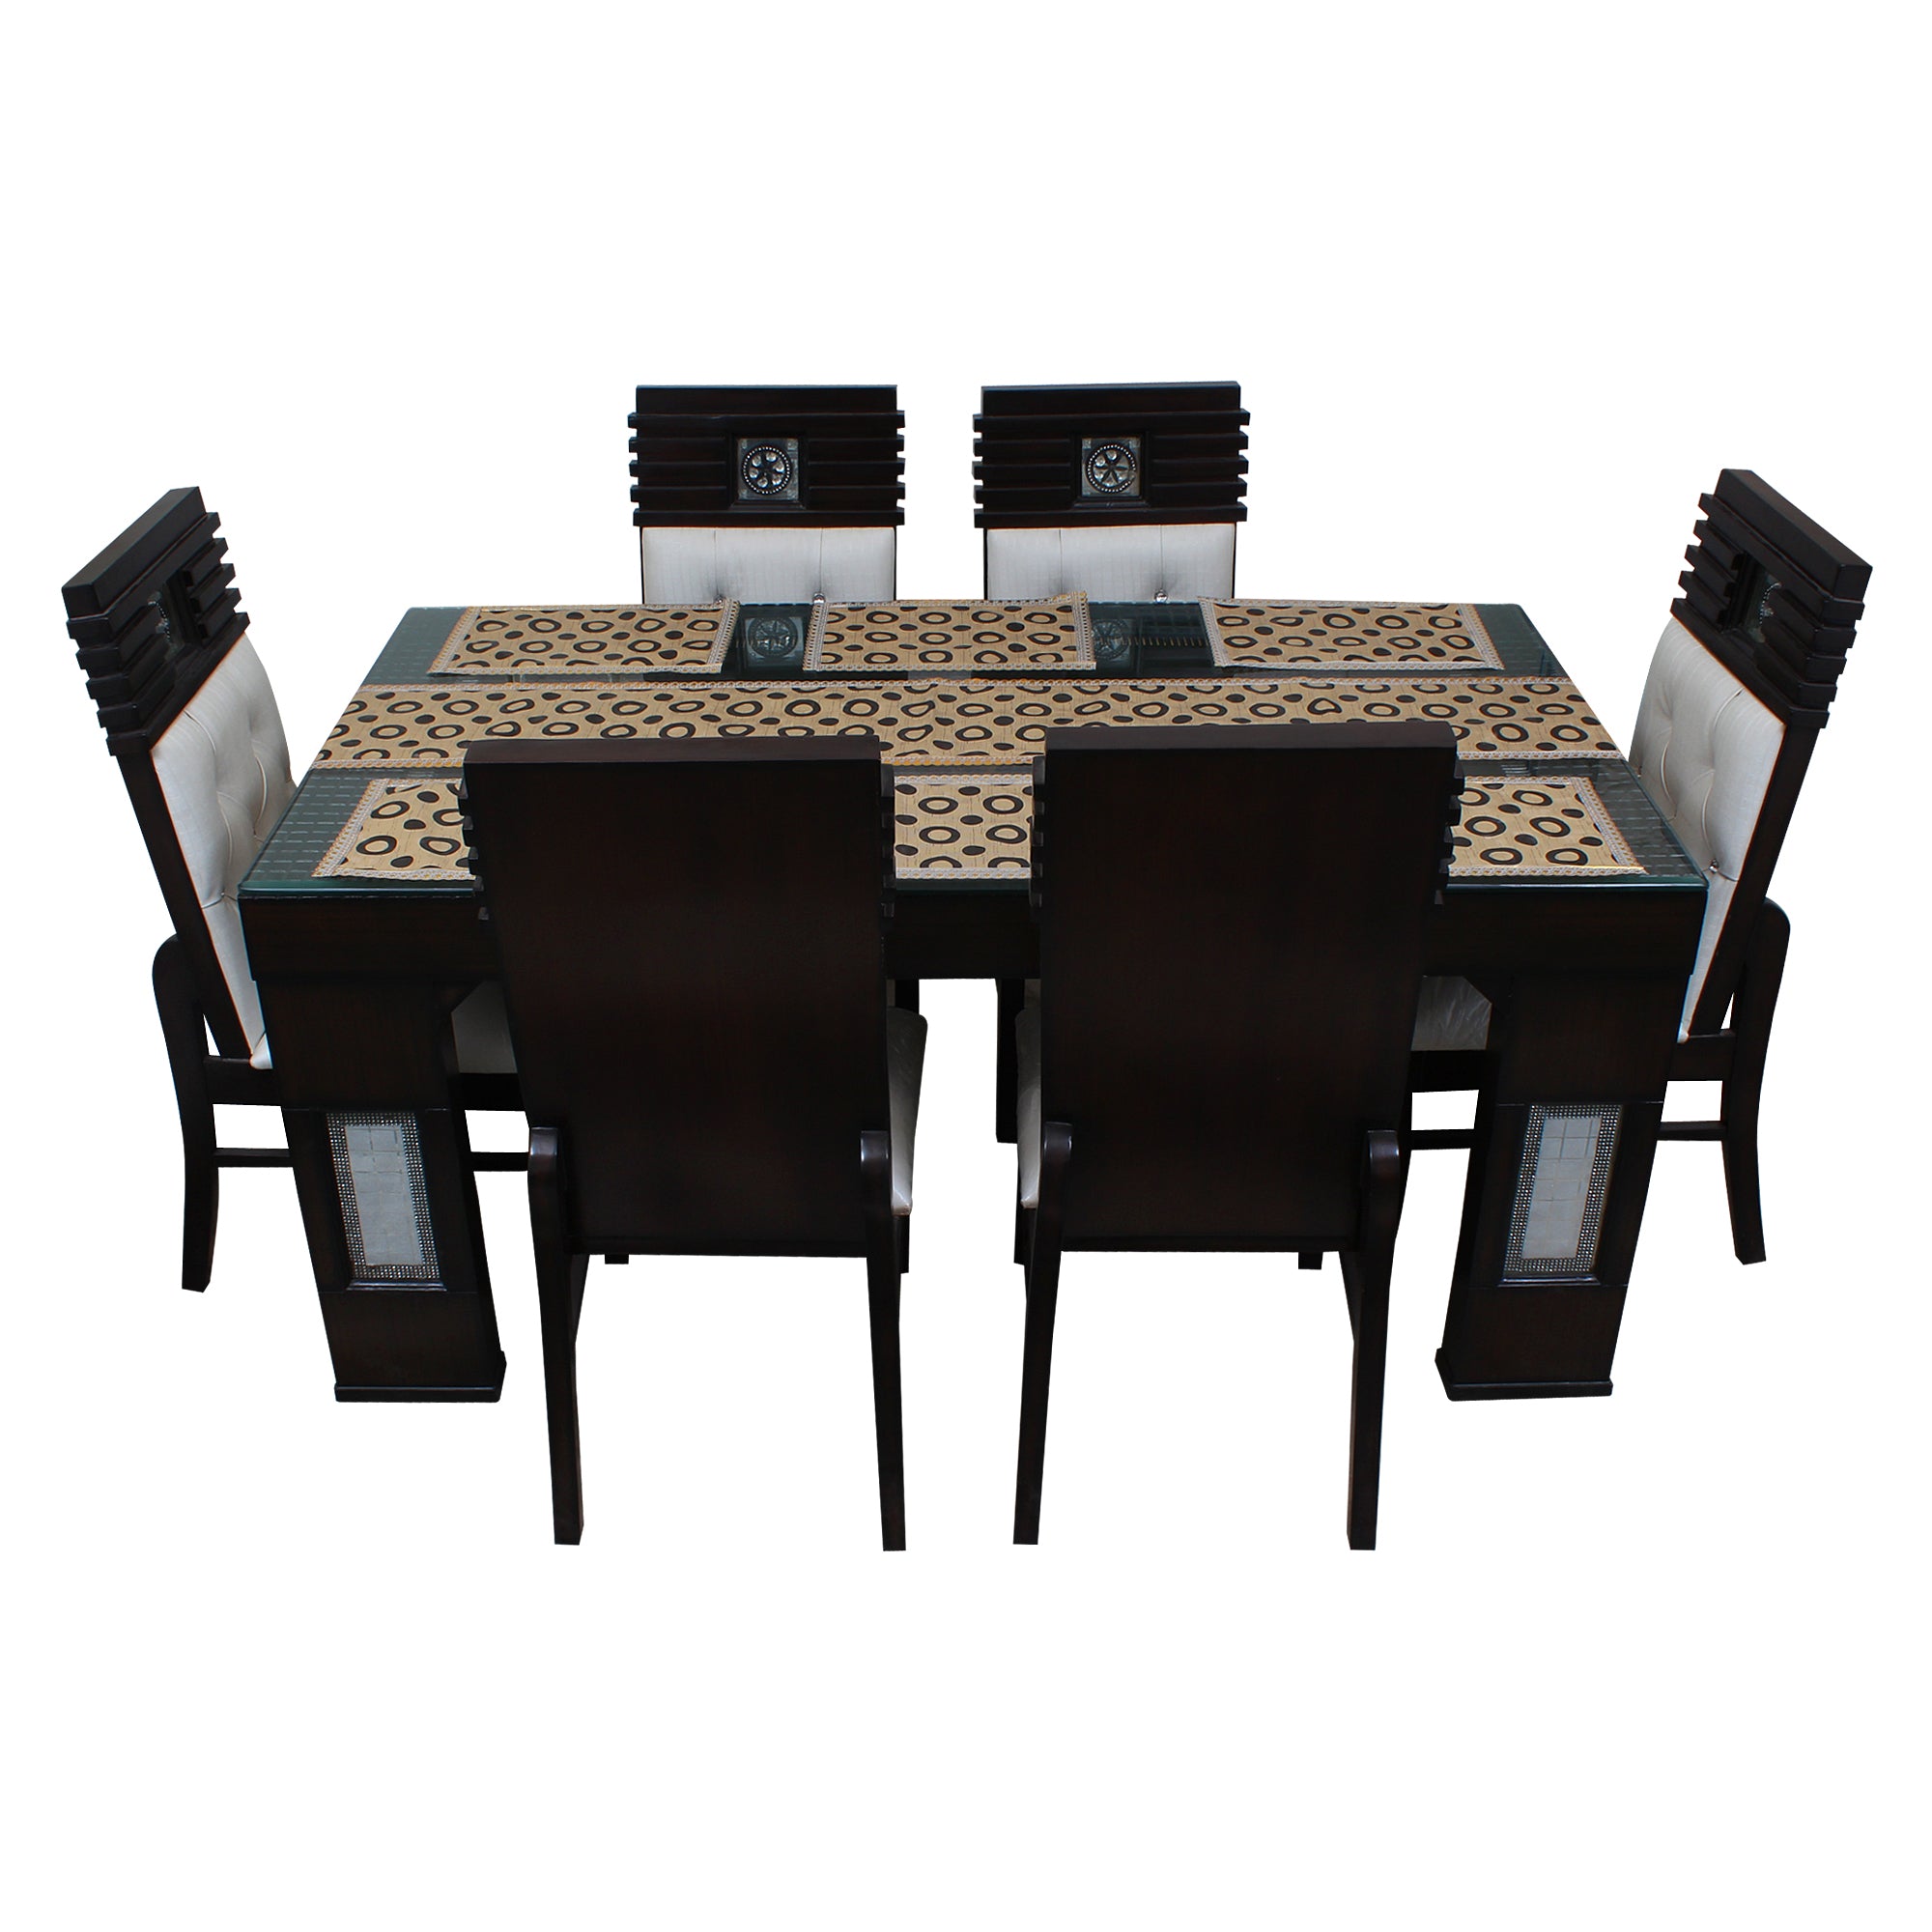 Waterproof & Dustproof Dining Table Runner With 6 Placemats, SA02 - Dream Care Furnishings Private Limited